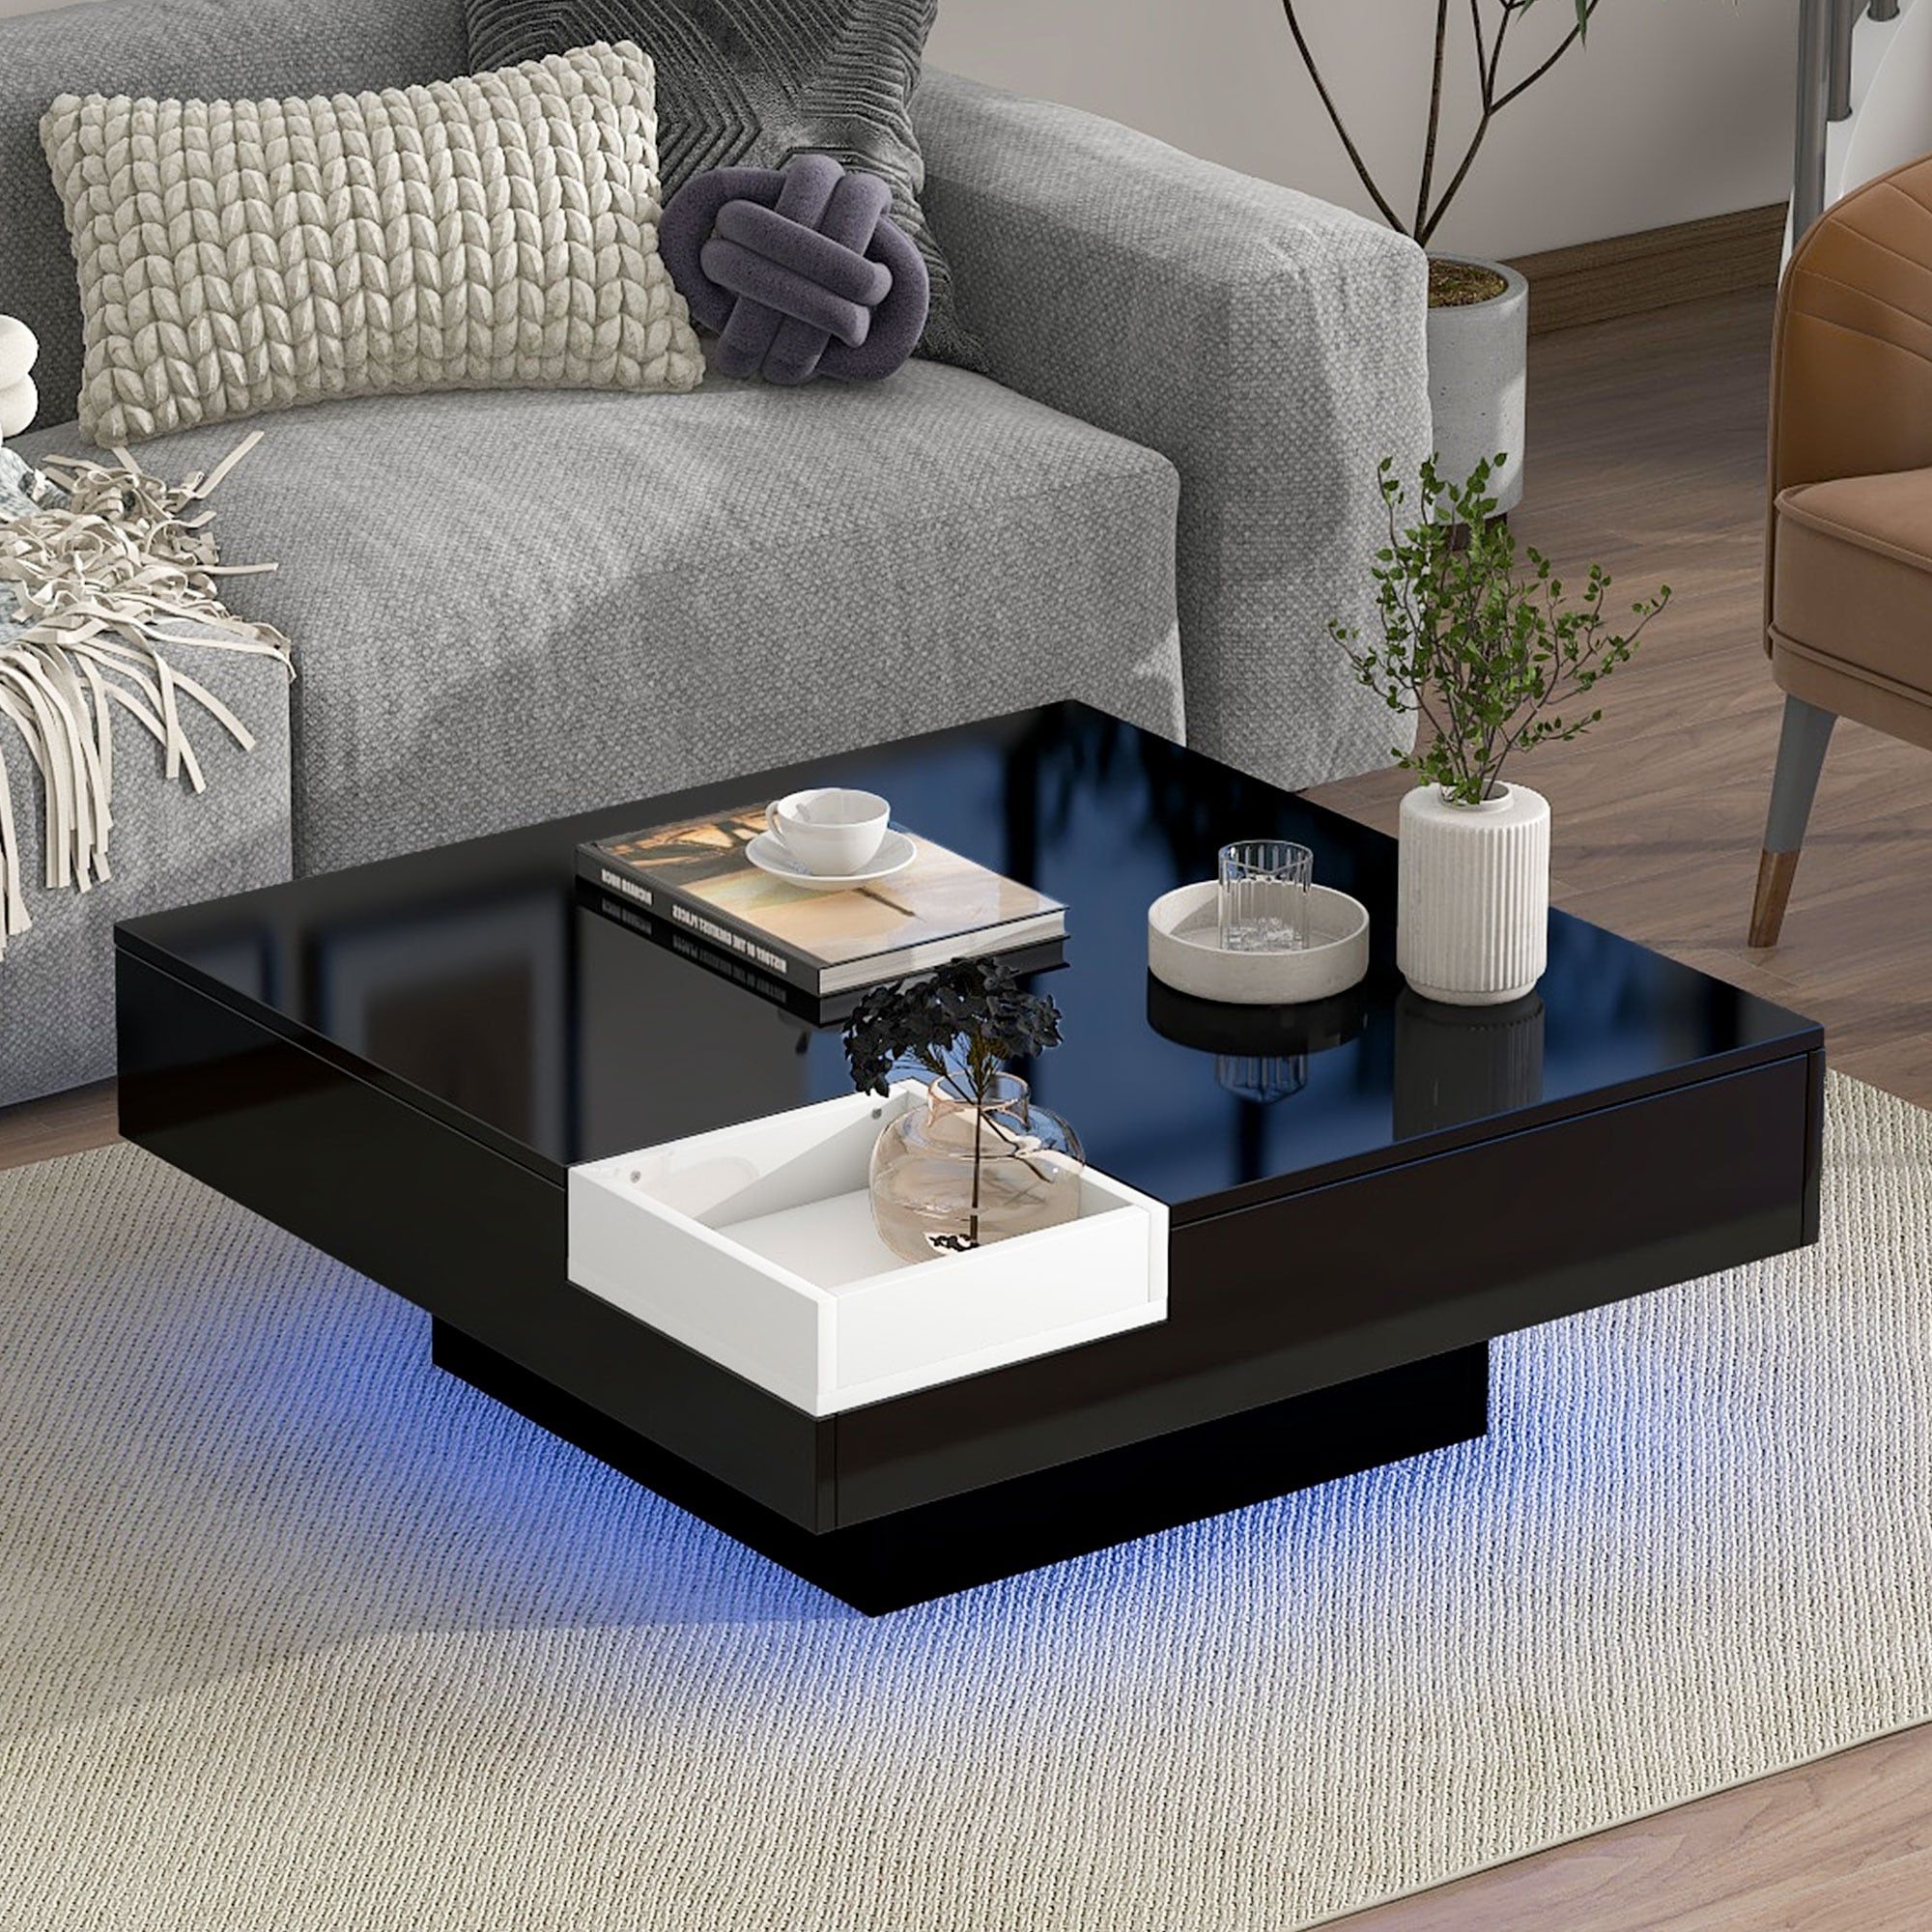 Best And Newest Square Coffee Table With Detachable Tray And Plug In 16 Color Led Strip  Lights Remote Control – Bed Bath & Beyond – 37367161 With Detachable Tray Coffee Tables (Photo 4 of 10)